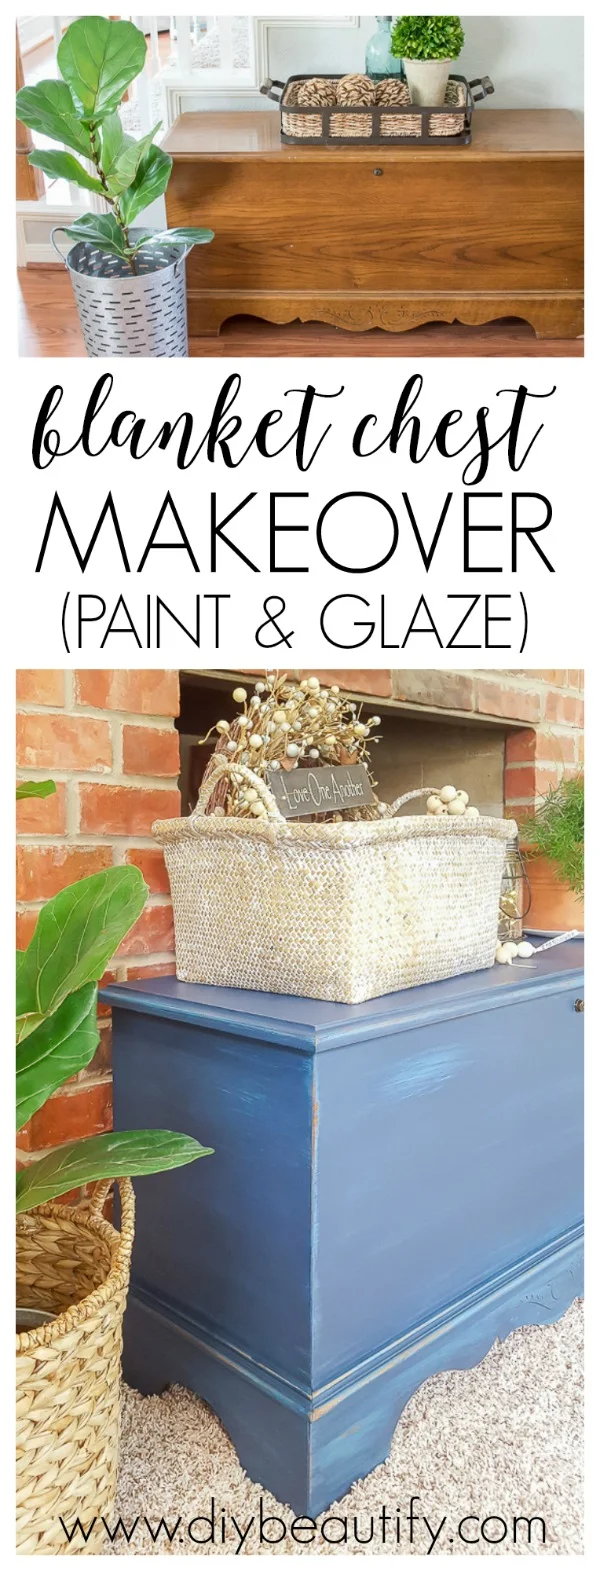 blanket chest makeover with DIY paint and glaze